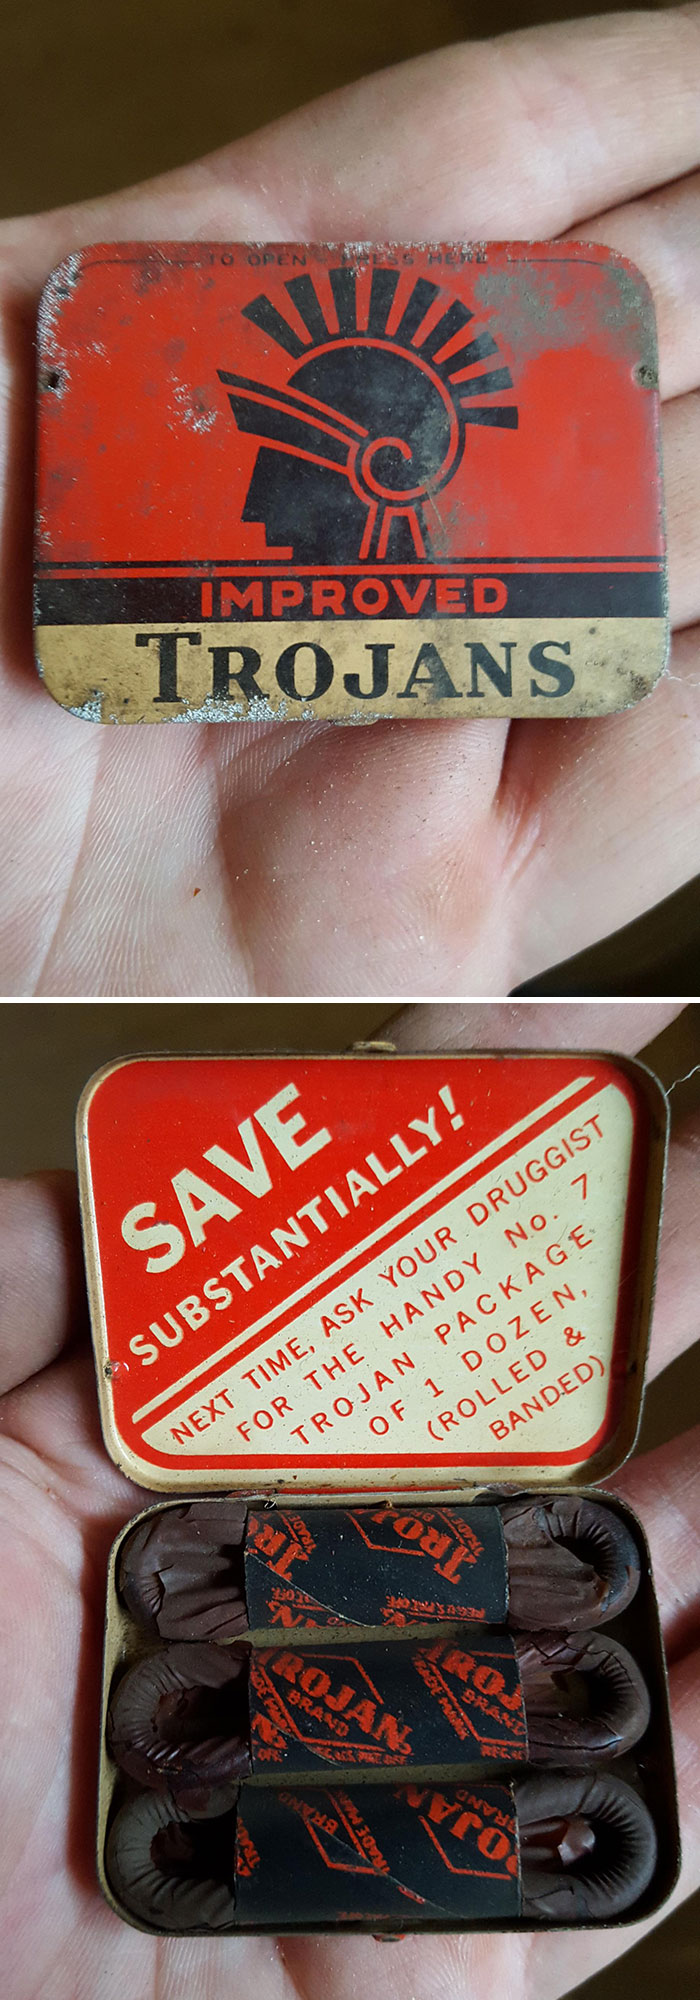 I Found These 60-Year-Old Condoms In My Basement